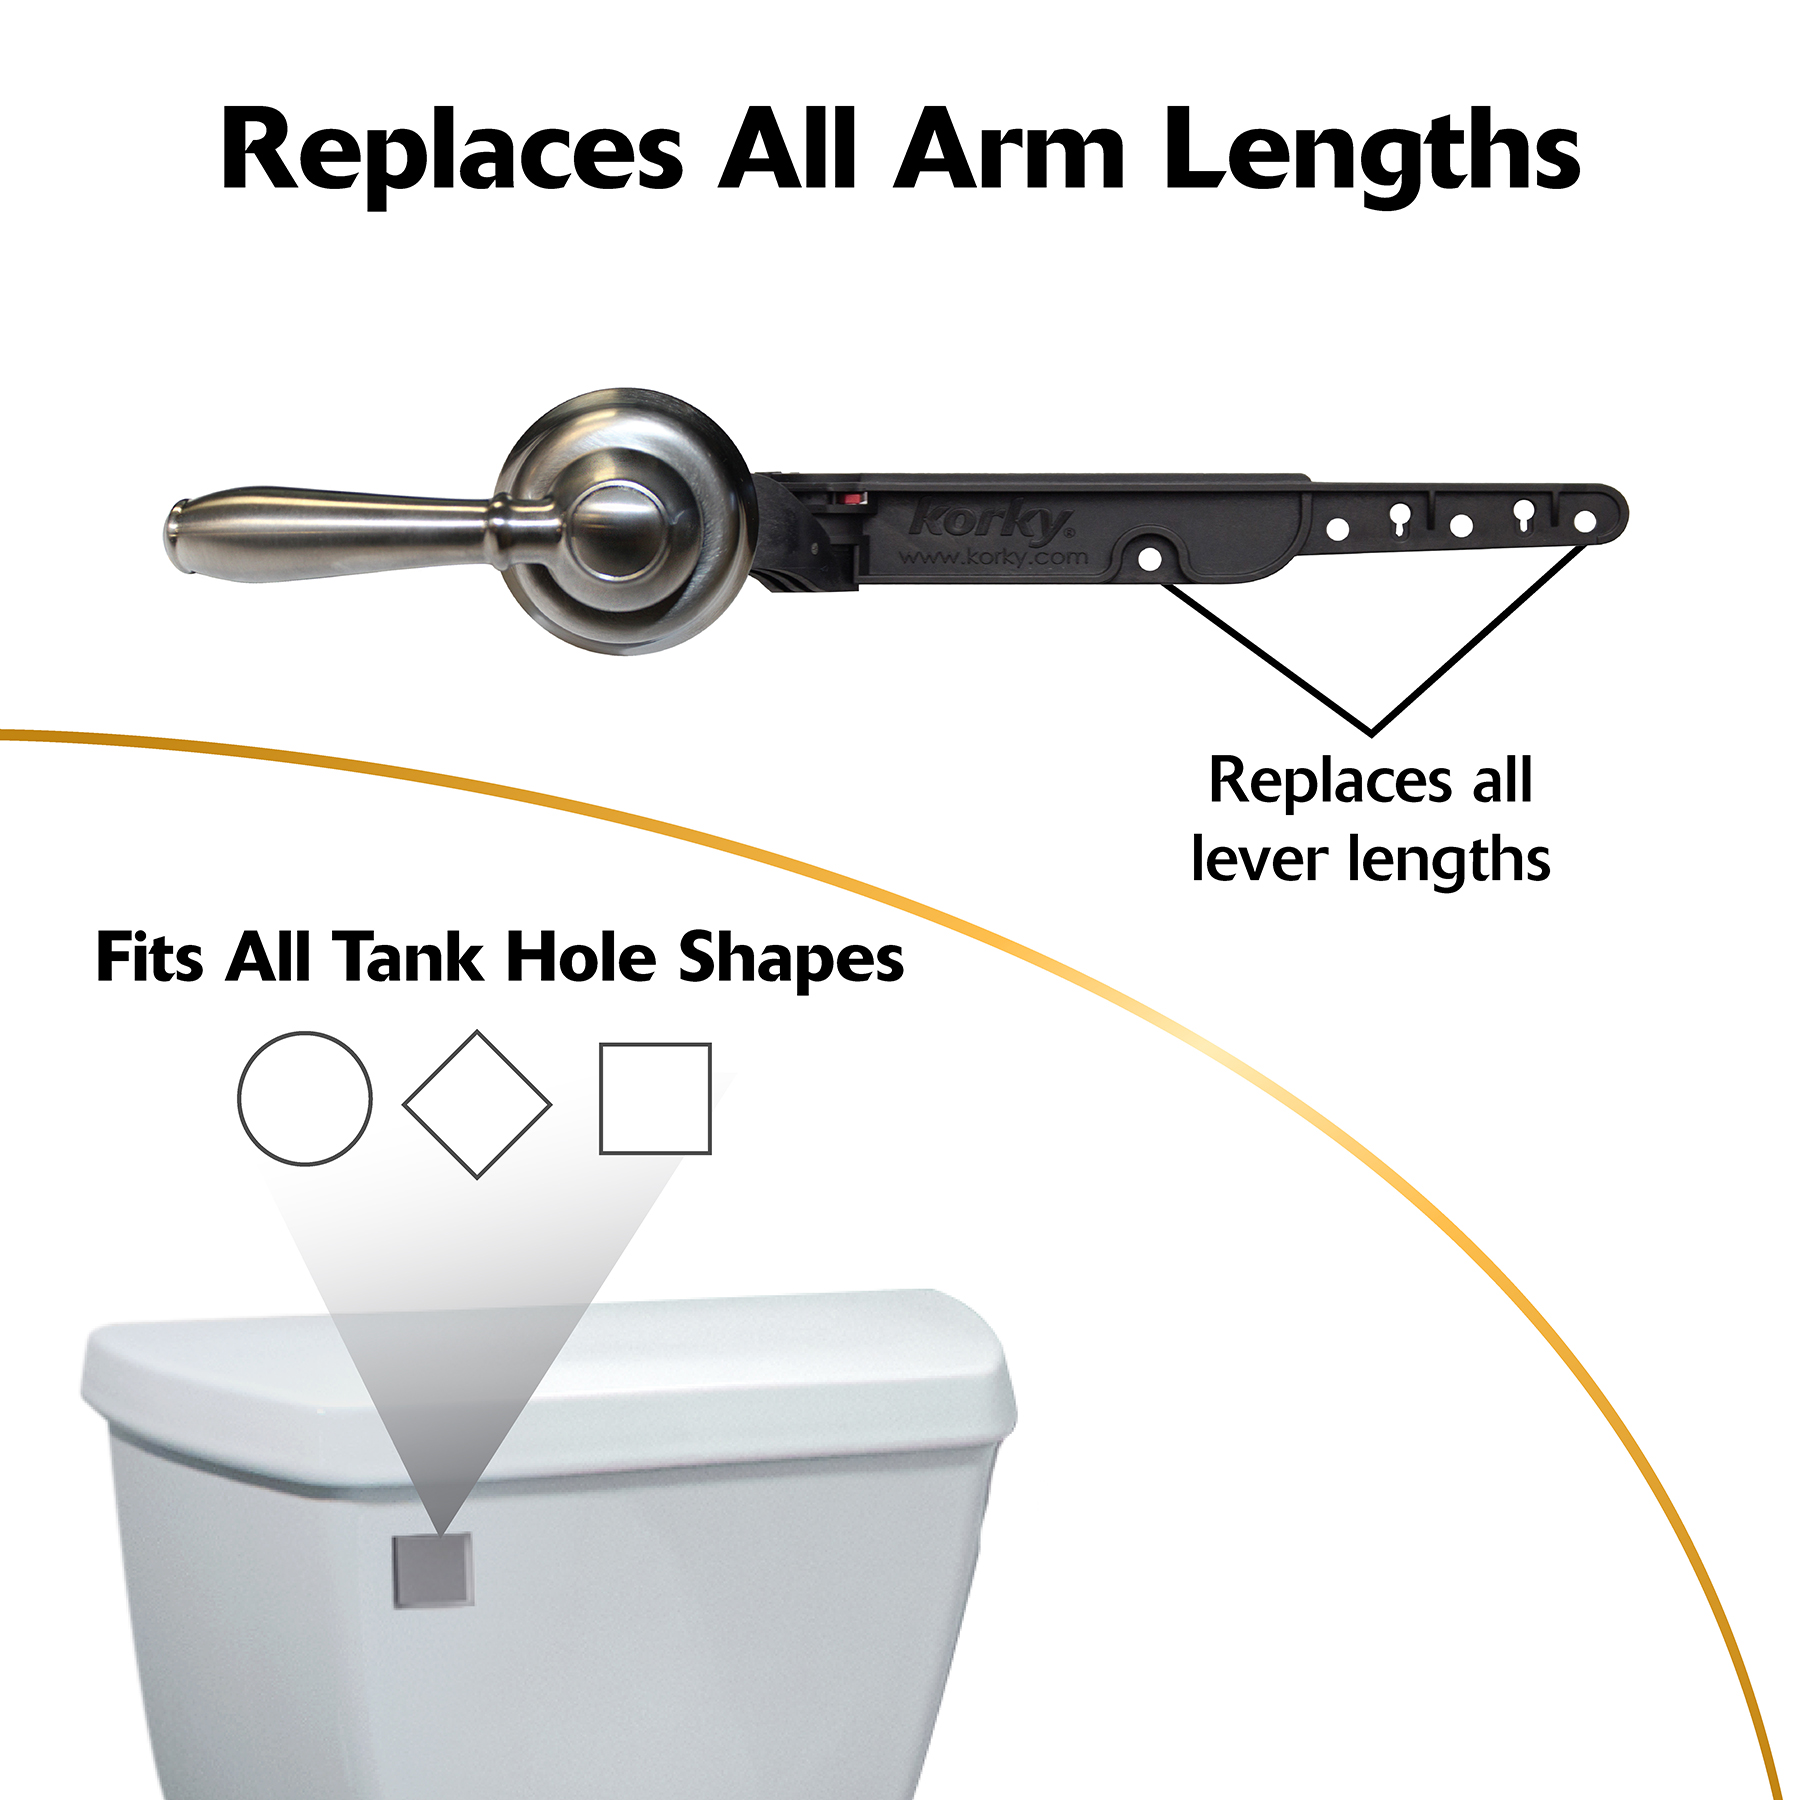 The Korky faucet brushed nickel toilet handle replaces all arm lengths and fits all tank hole shapes